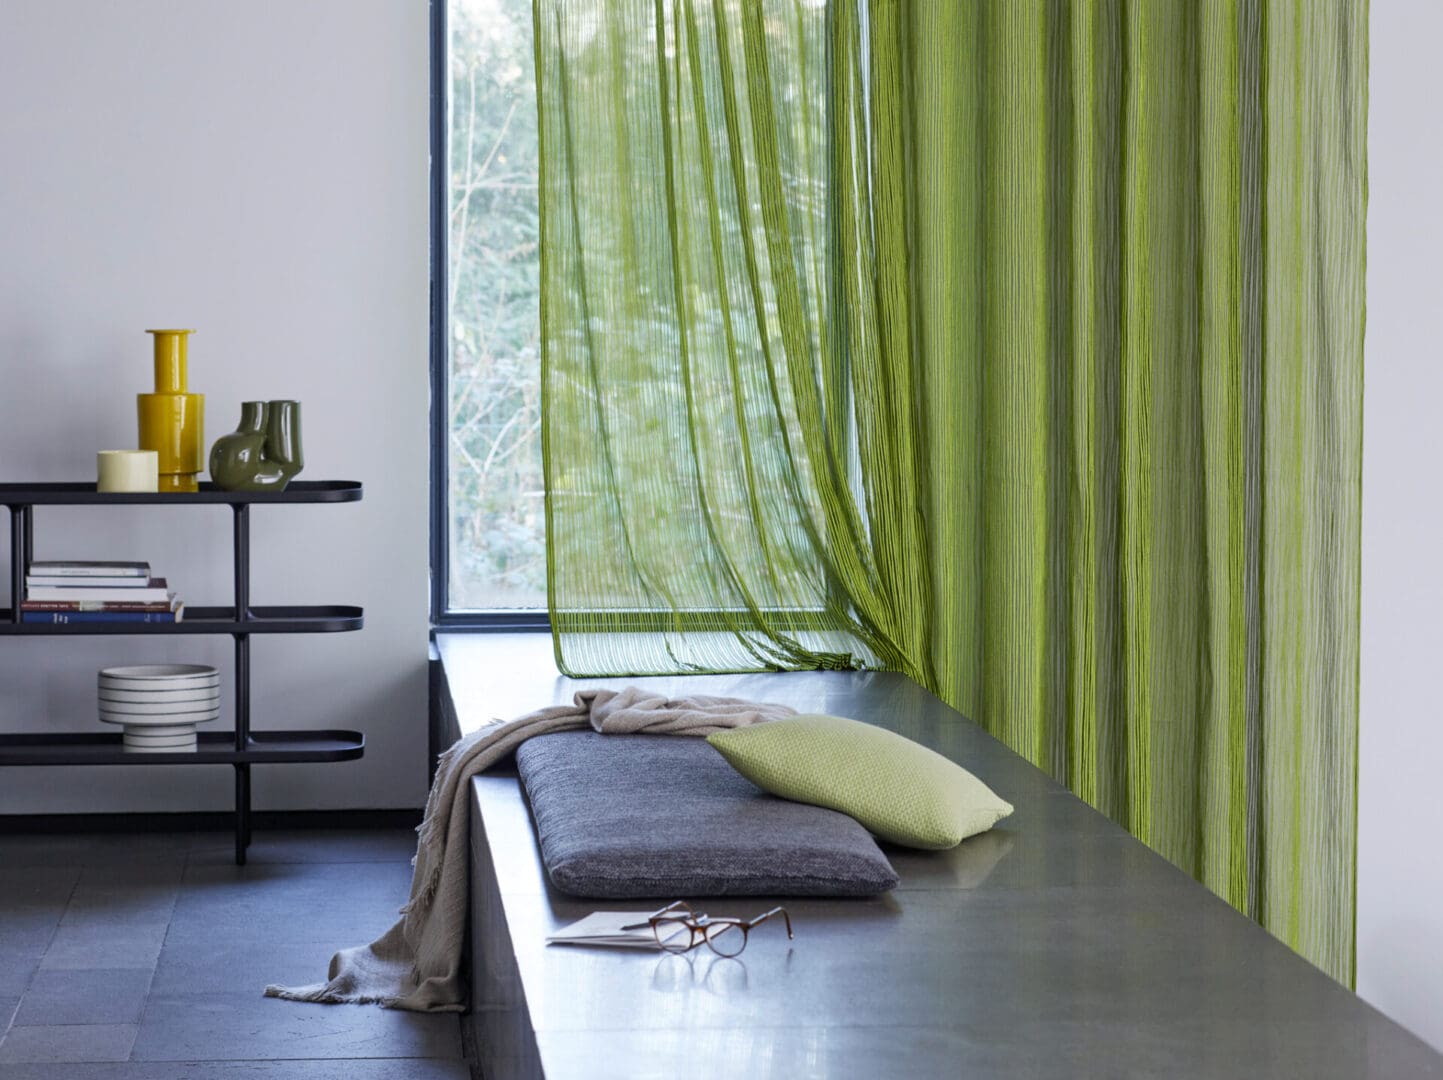 A room with green curtains and pillows on the bench.